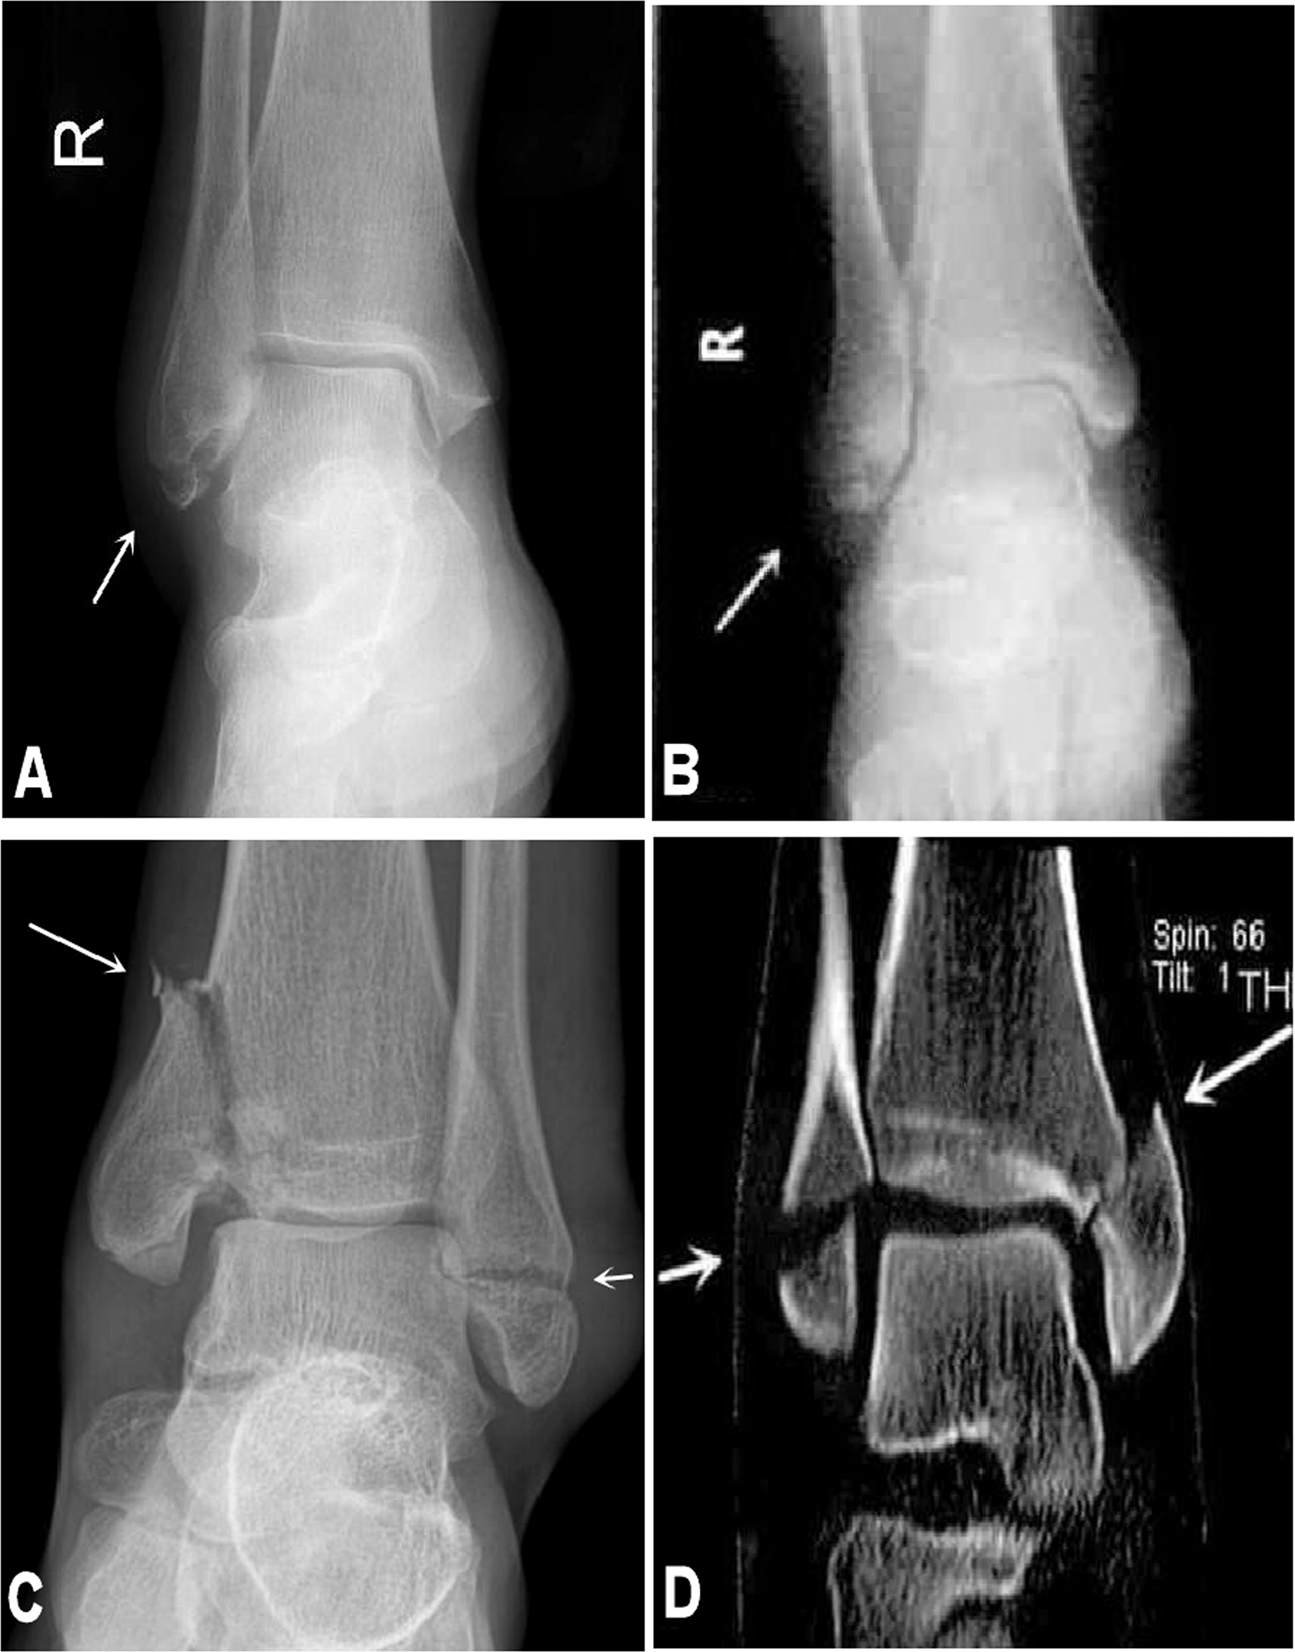 Radiographic analysis of adult ankle fractures using combined Danis-Weber  and Lauge-Hansen classification systems